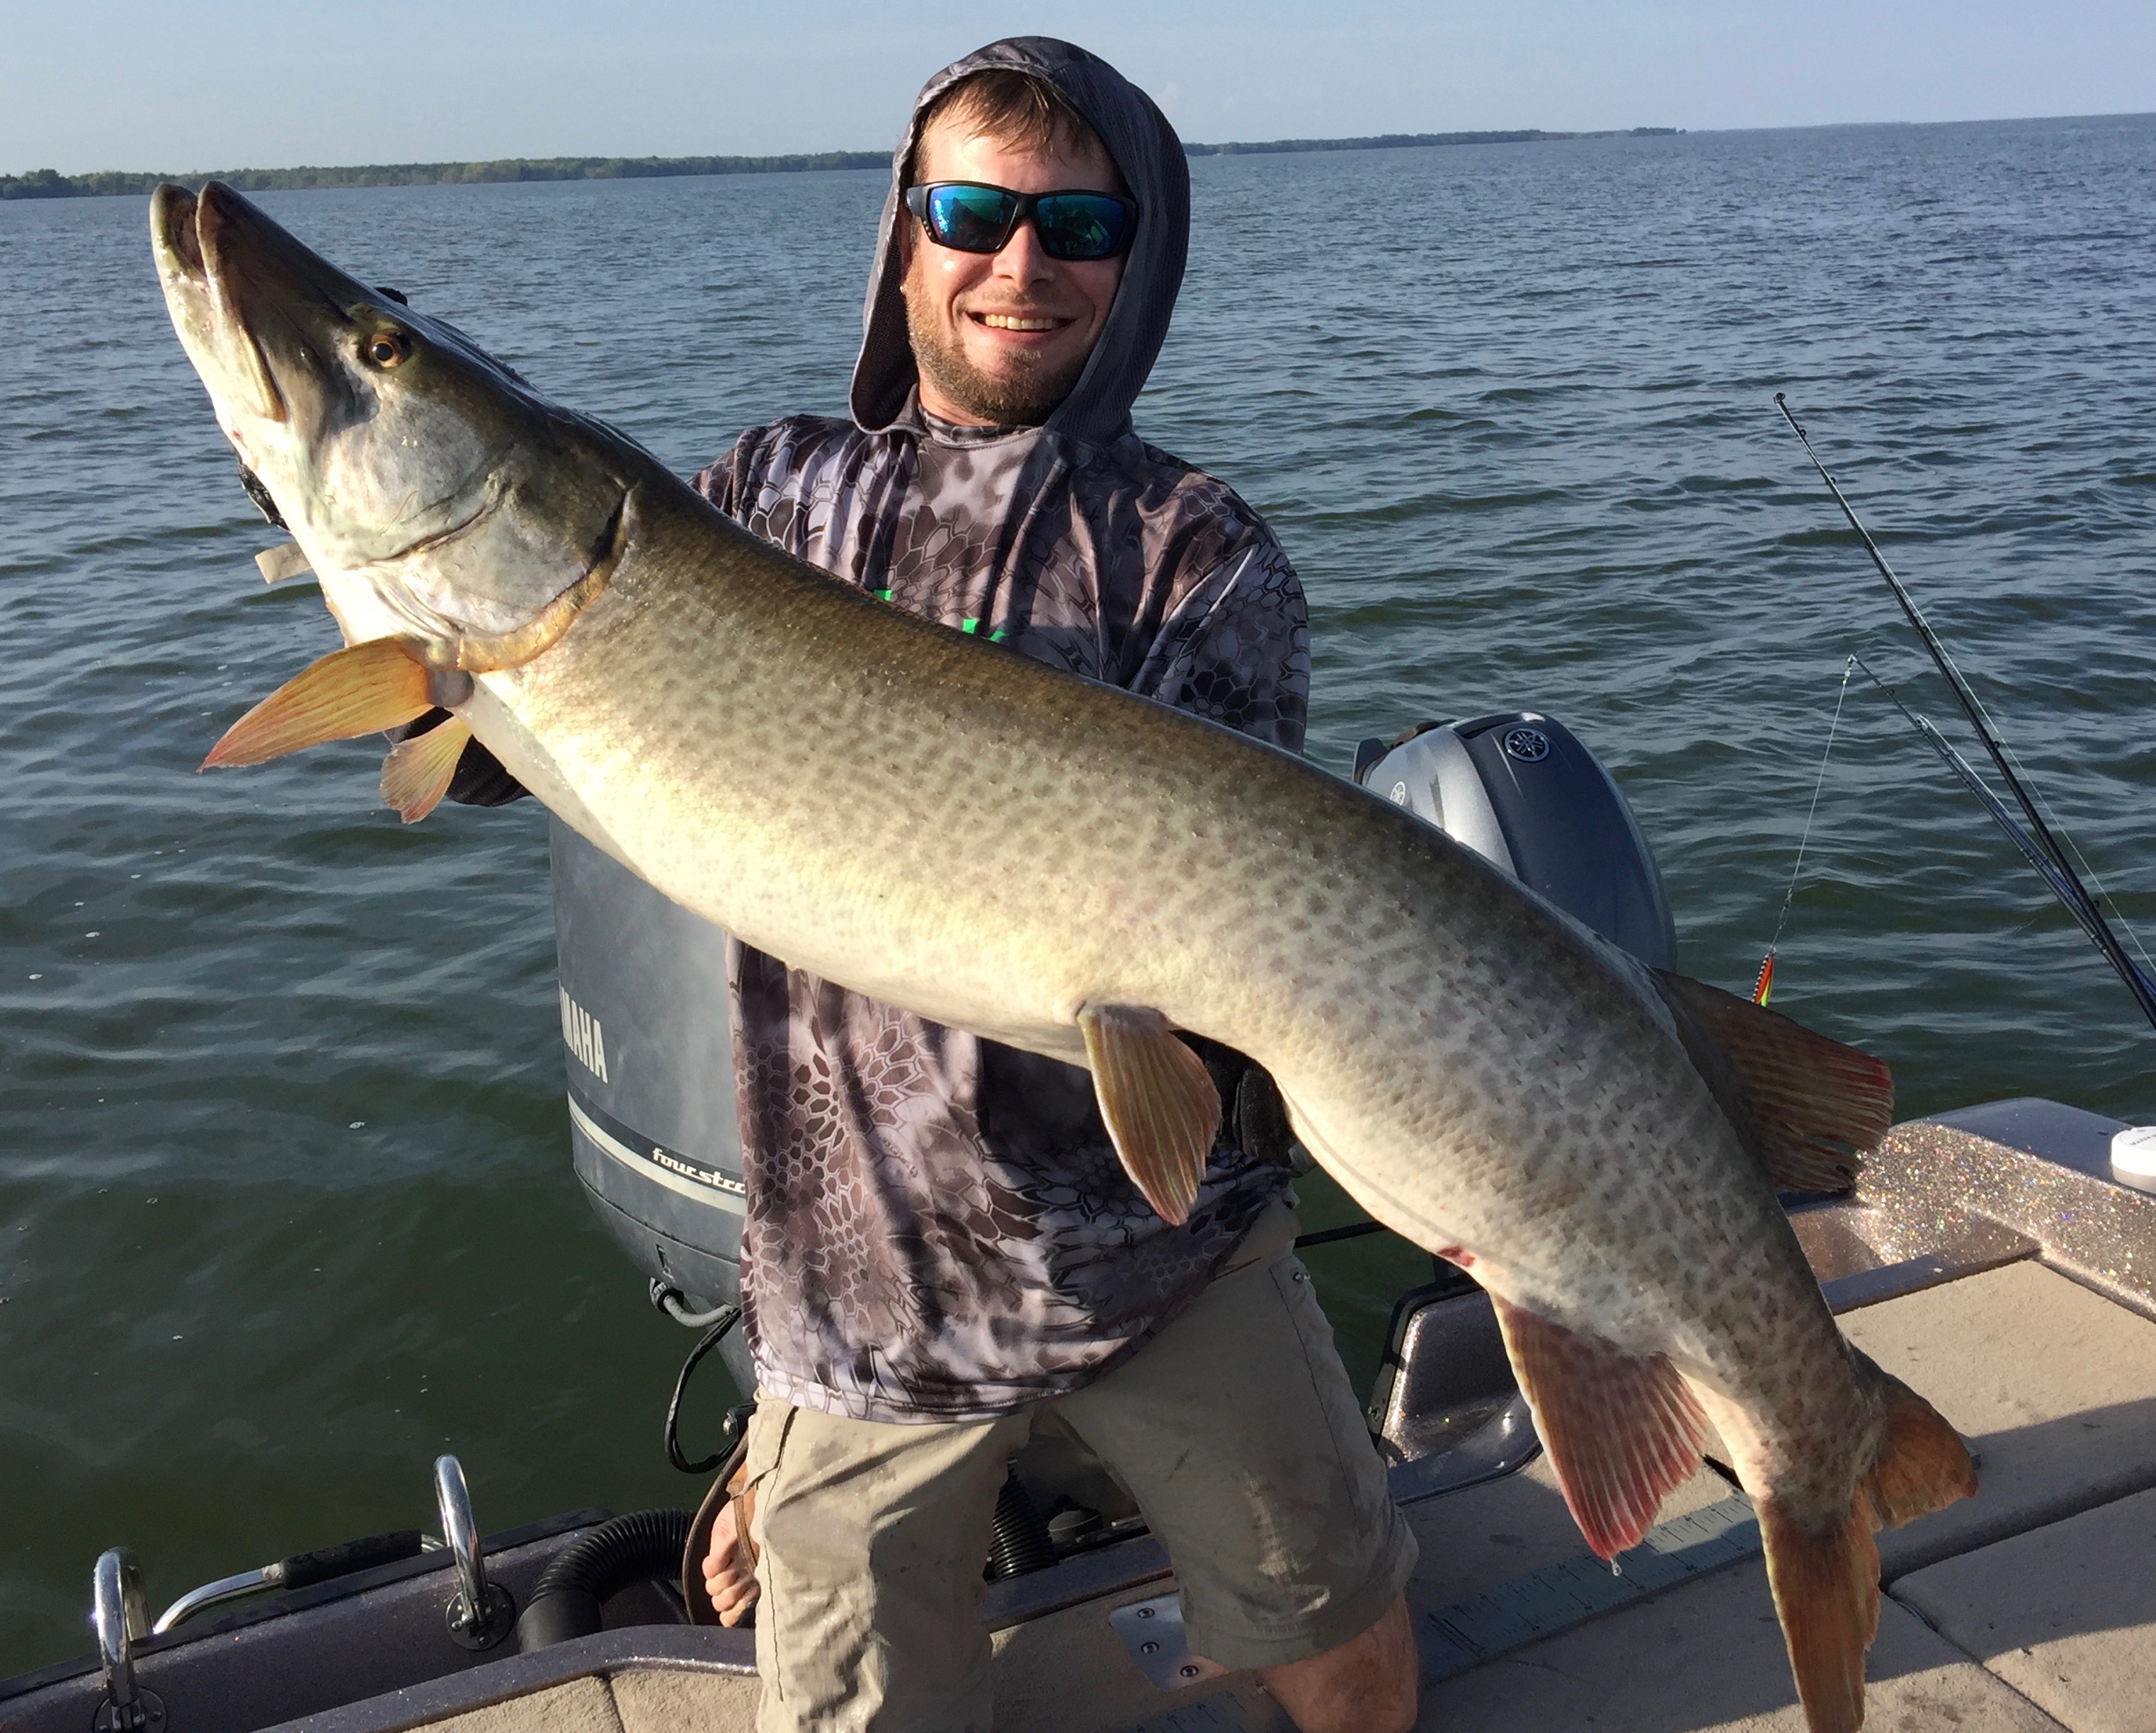 54 inch muskie on Green Bay in Wisconsin on 08/17/2019 MuskieFIRST